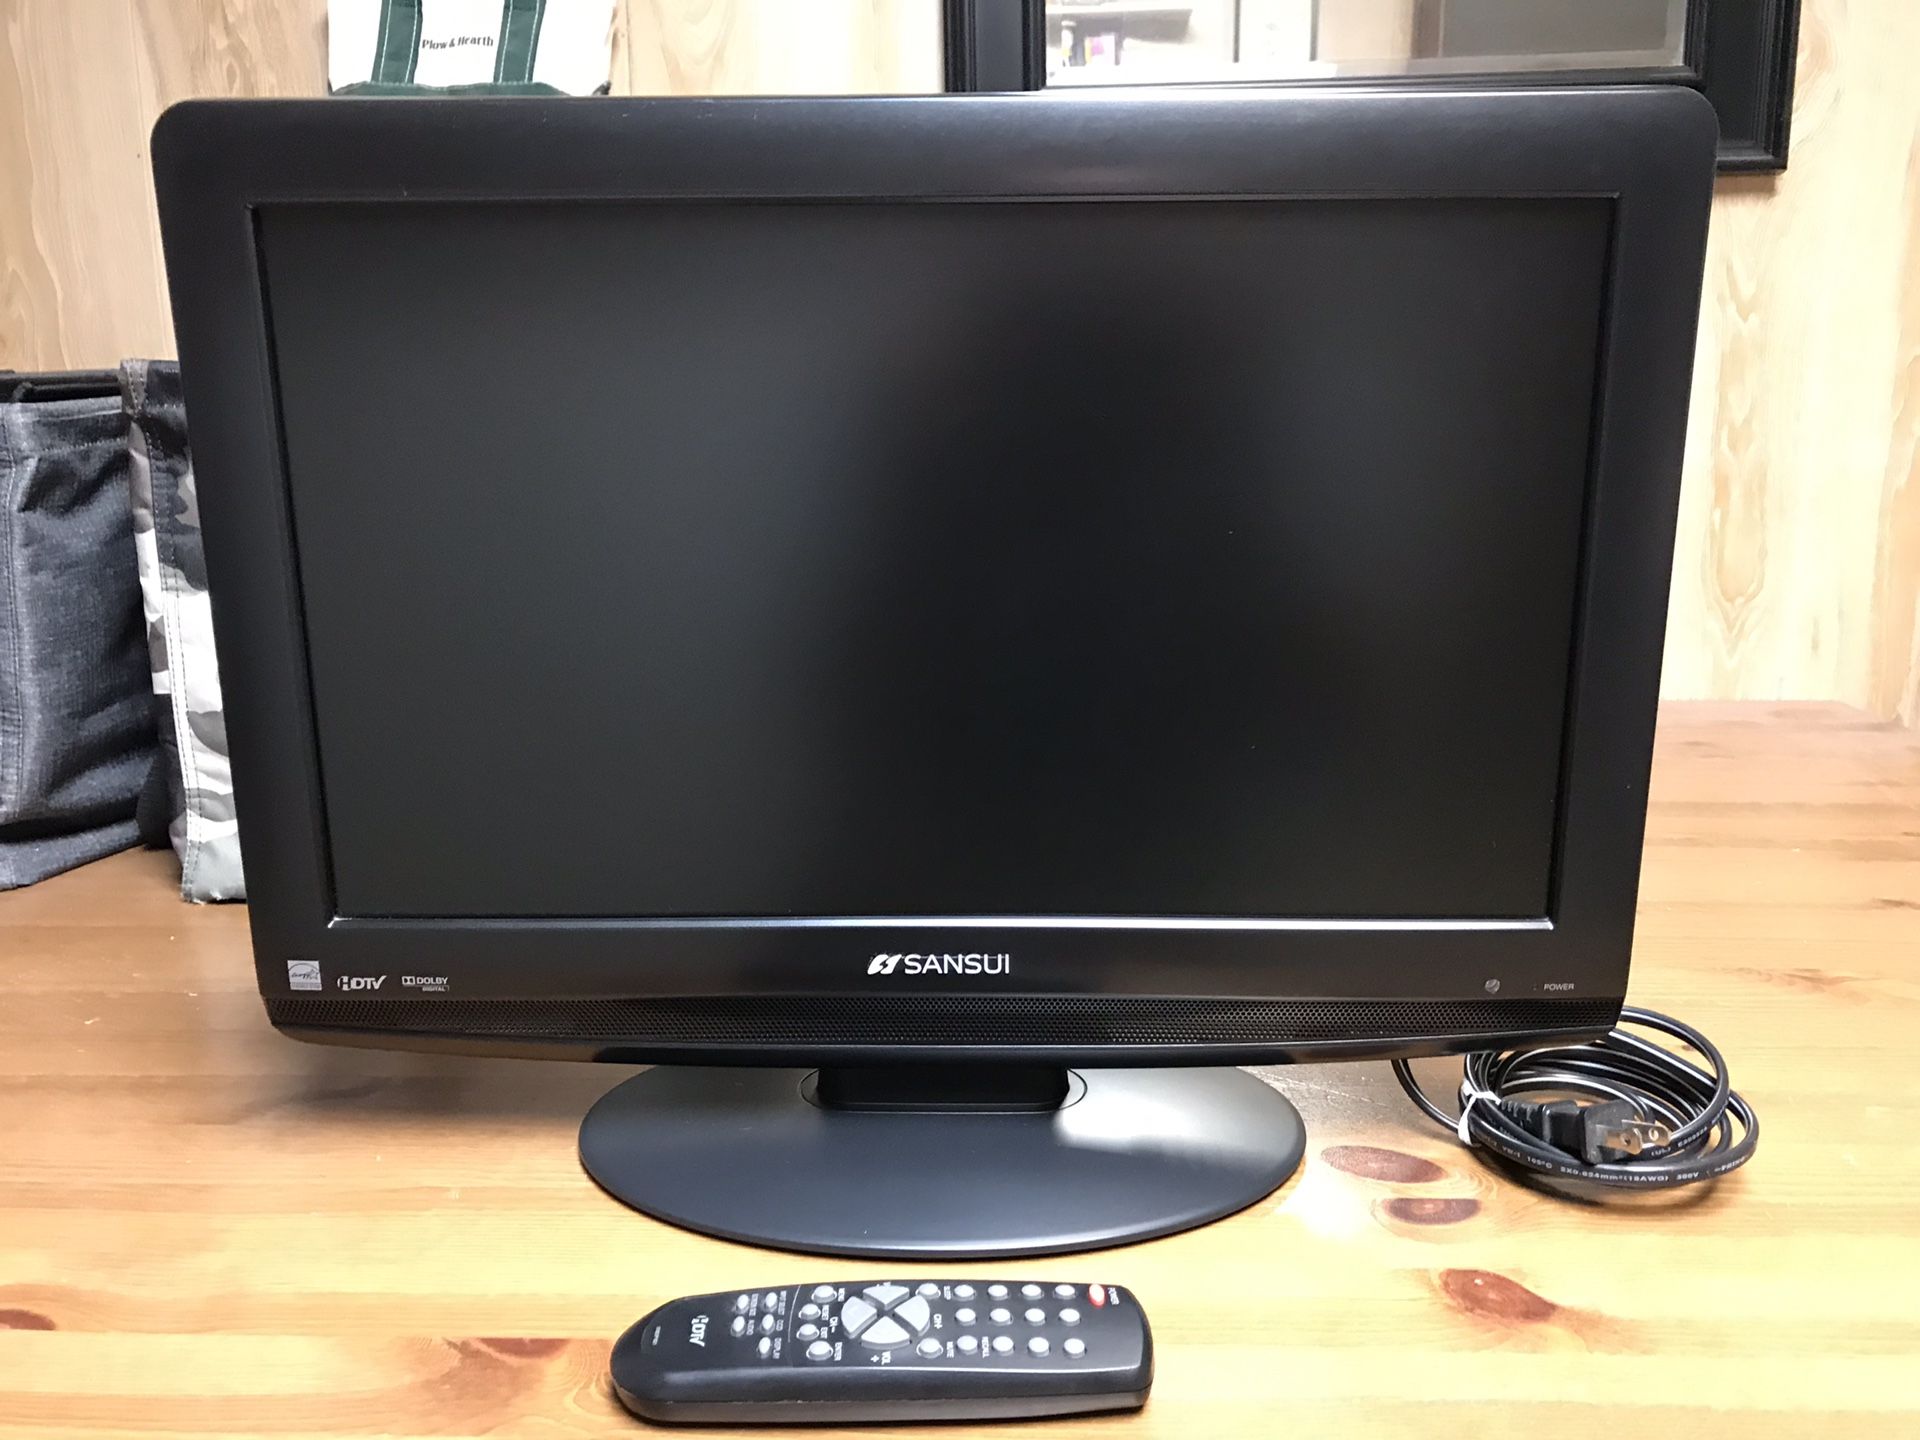 19” SANSUI LCD TV with Remote